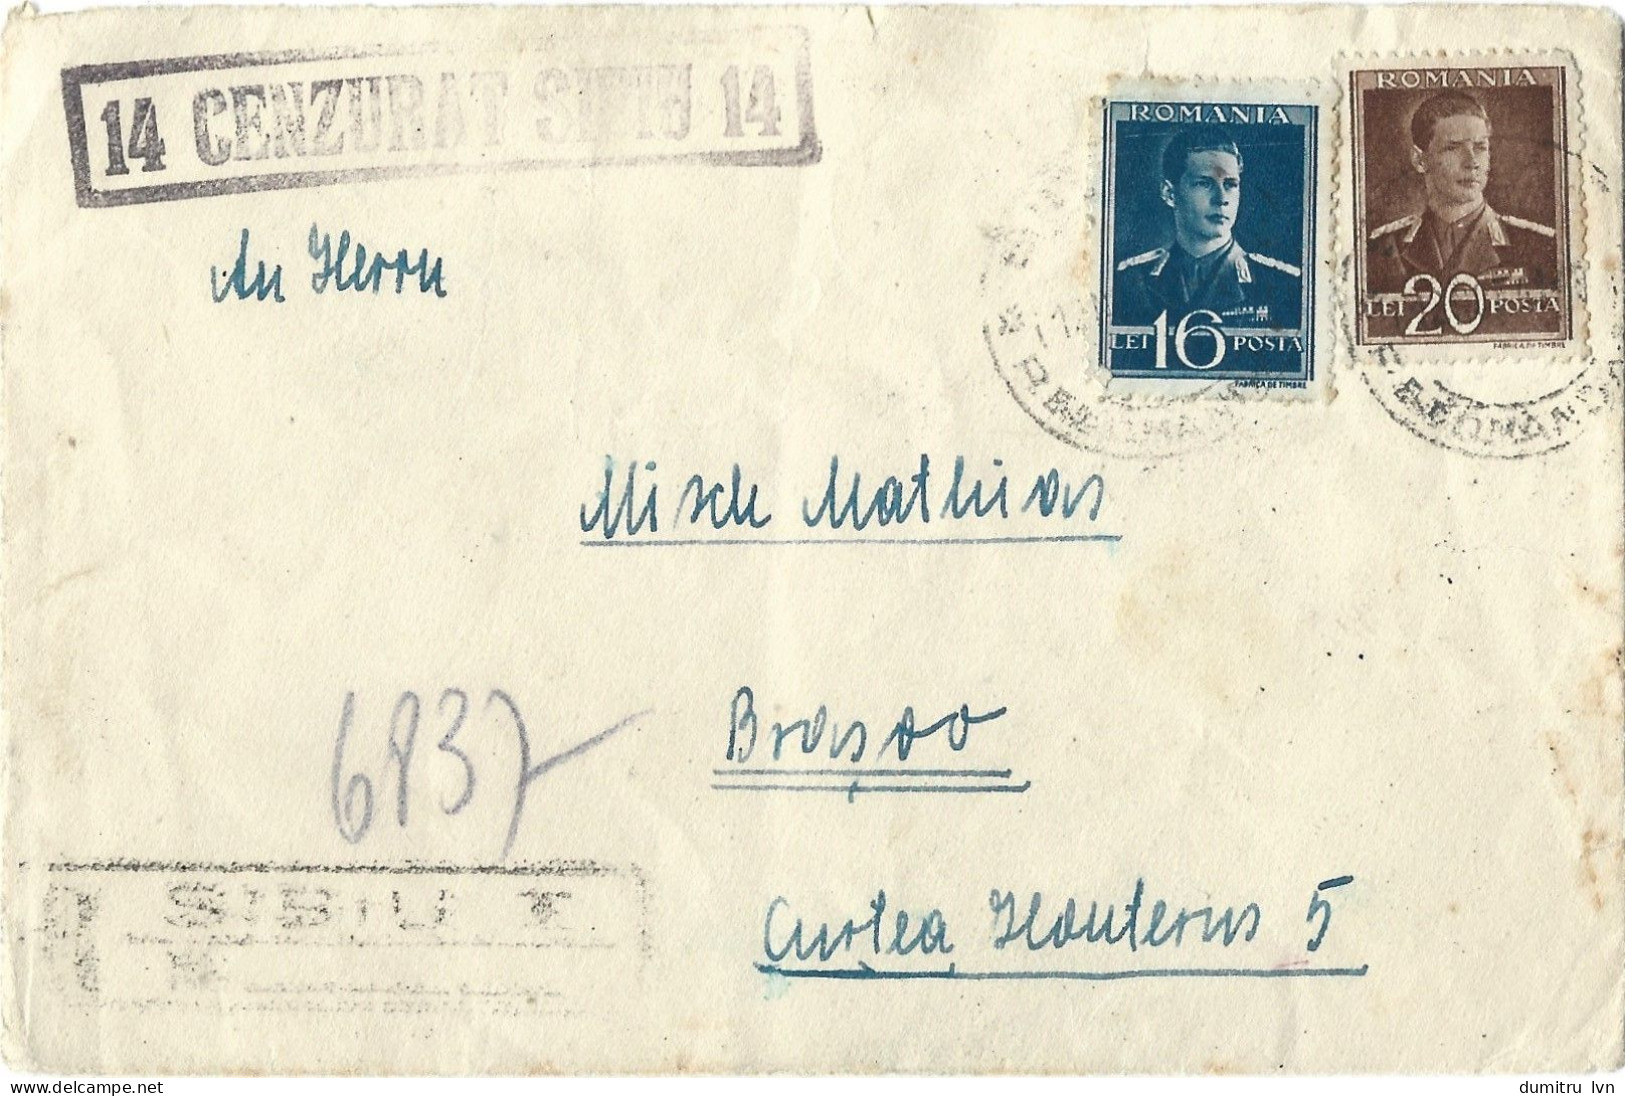 ROMANIA 1943 CENSORED SIBIU 14, CIRCULATED ENVELOPE FROM SIBIU TO BRASOV, COVER STATIONERY - Entiers Postaux